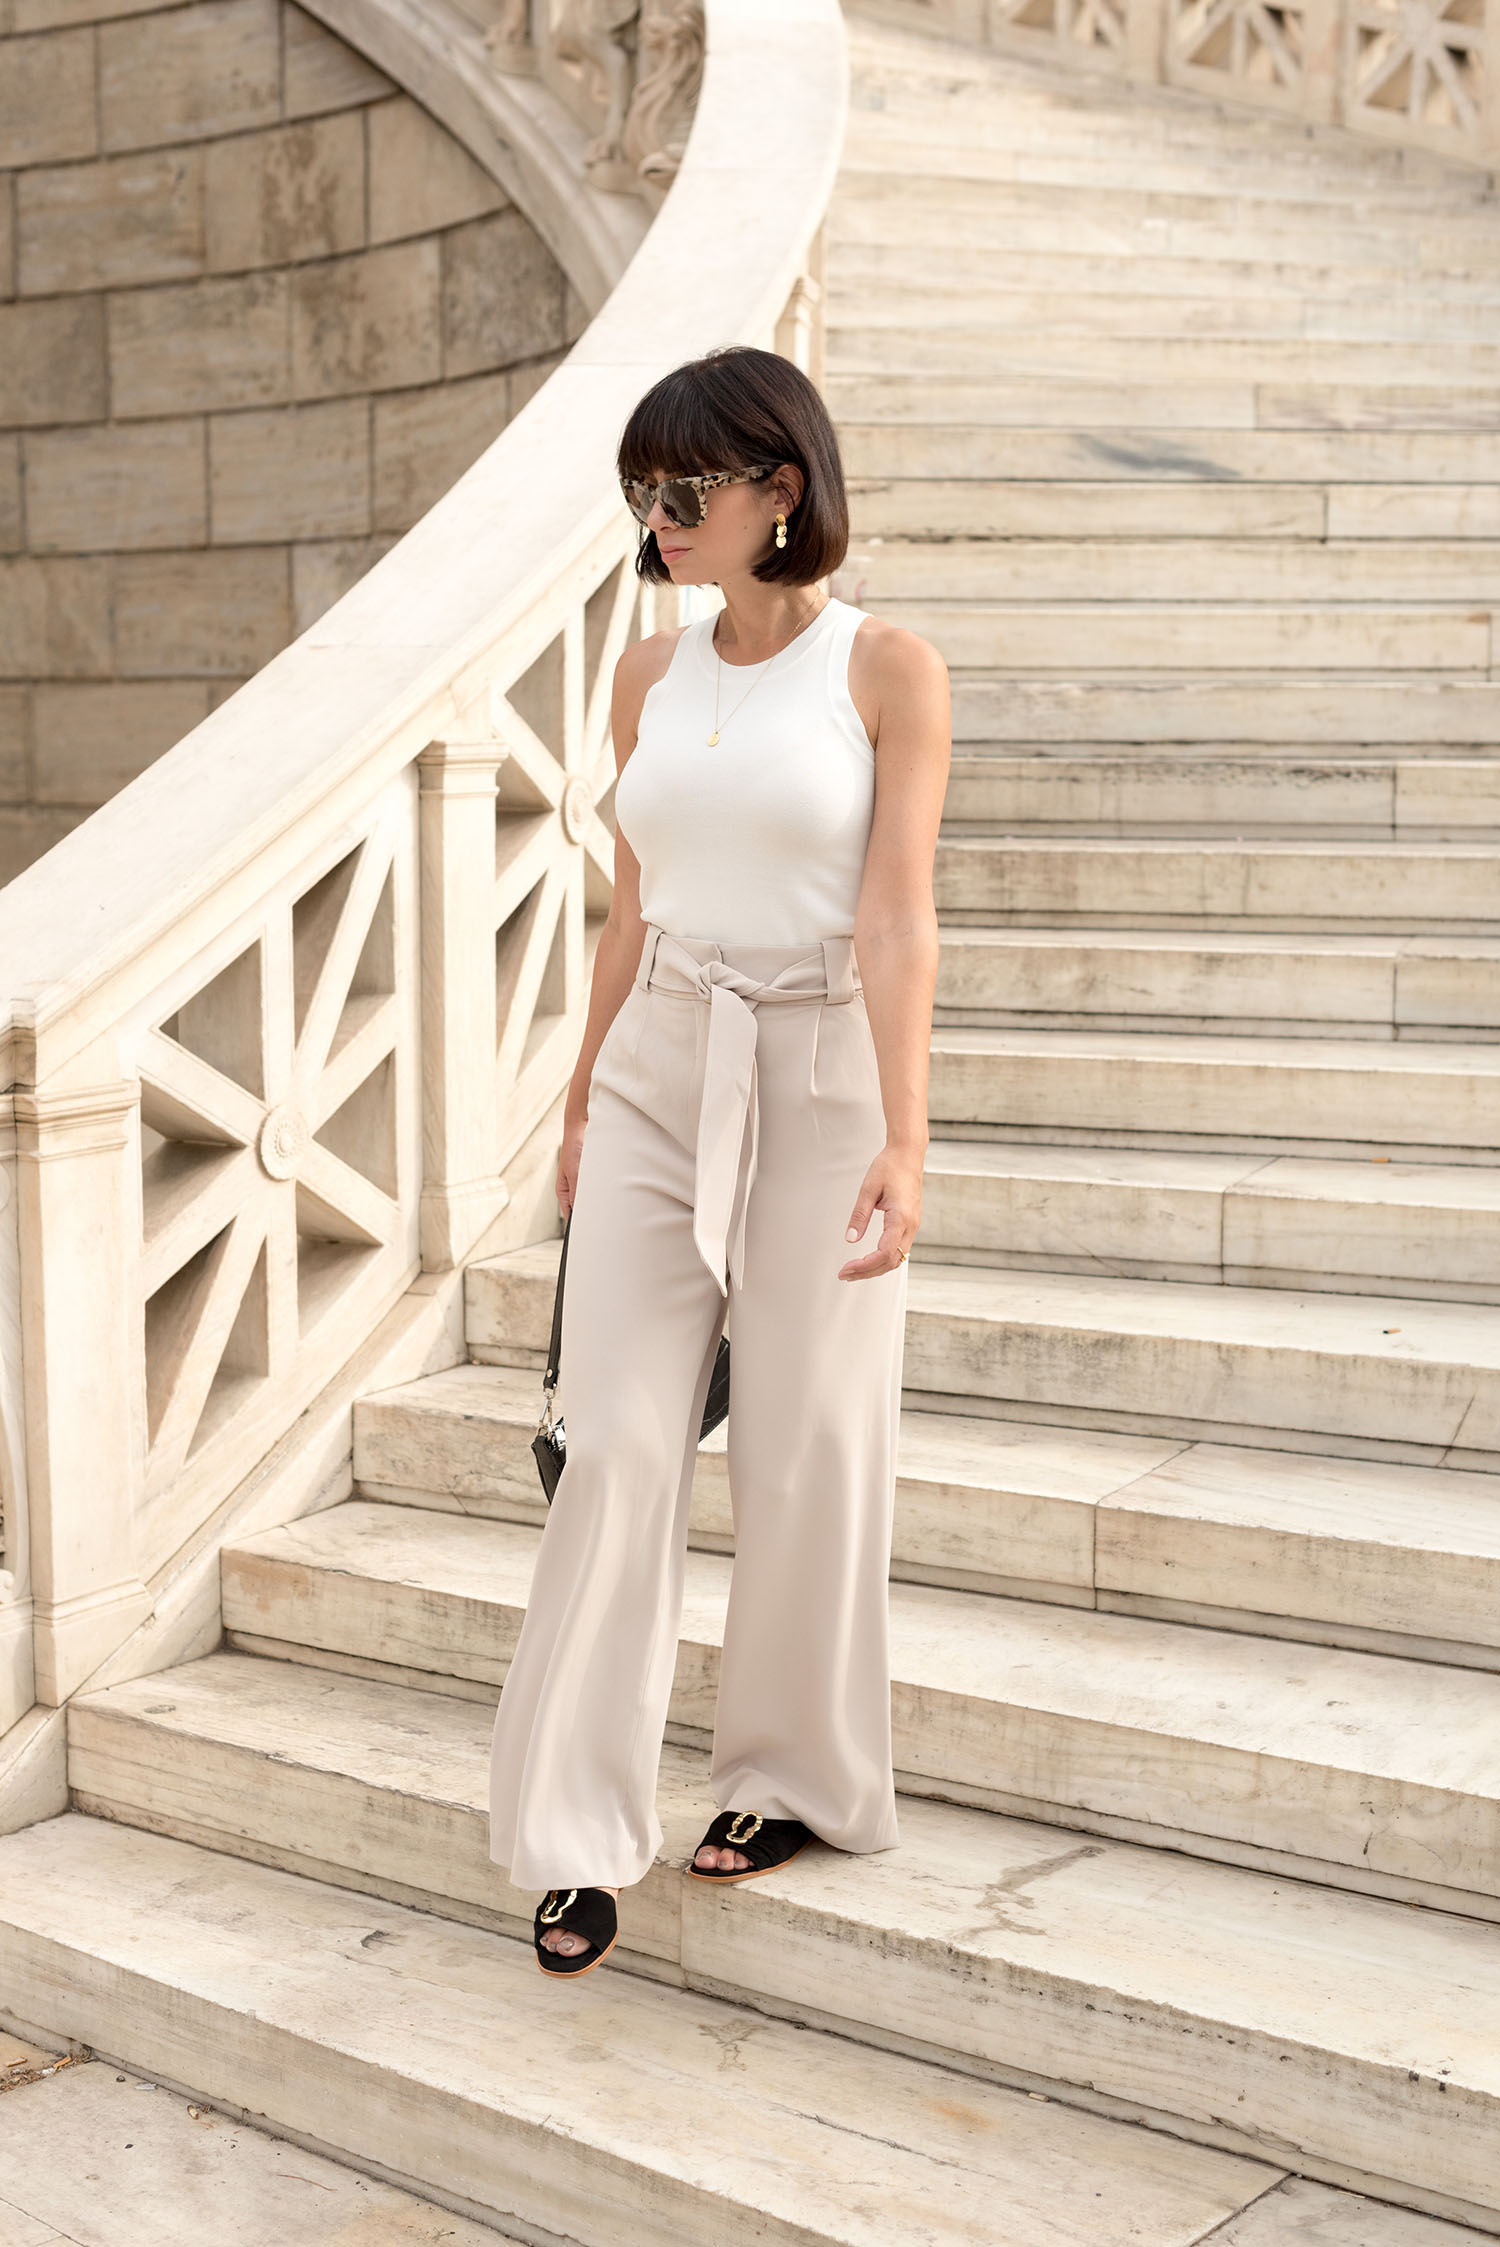 Coco & Vera - Mejuri earrings, H&M trousers, Flattered sandals